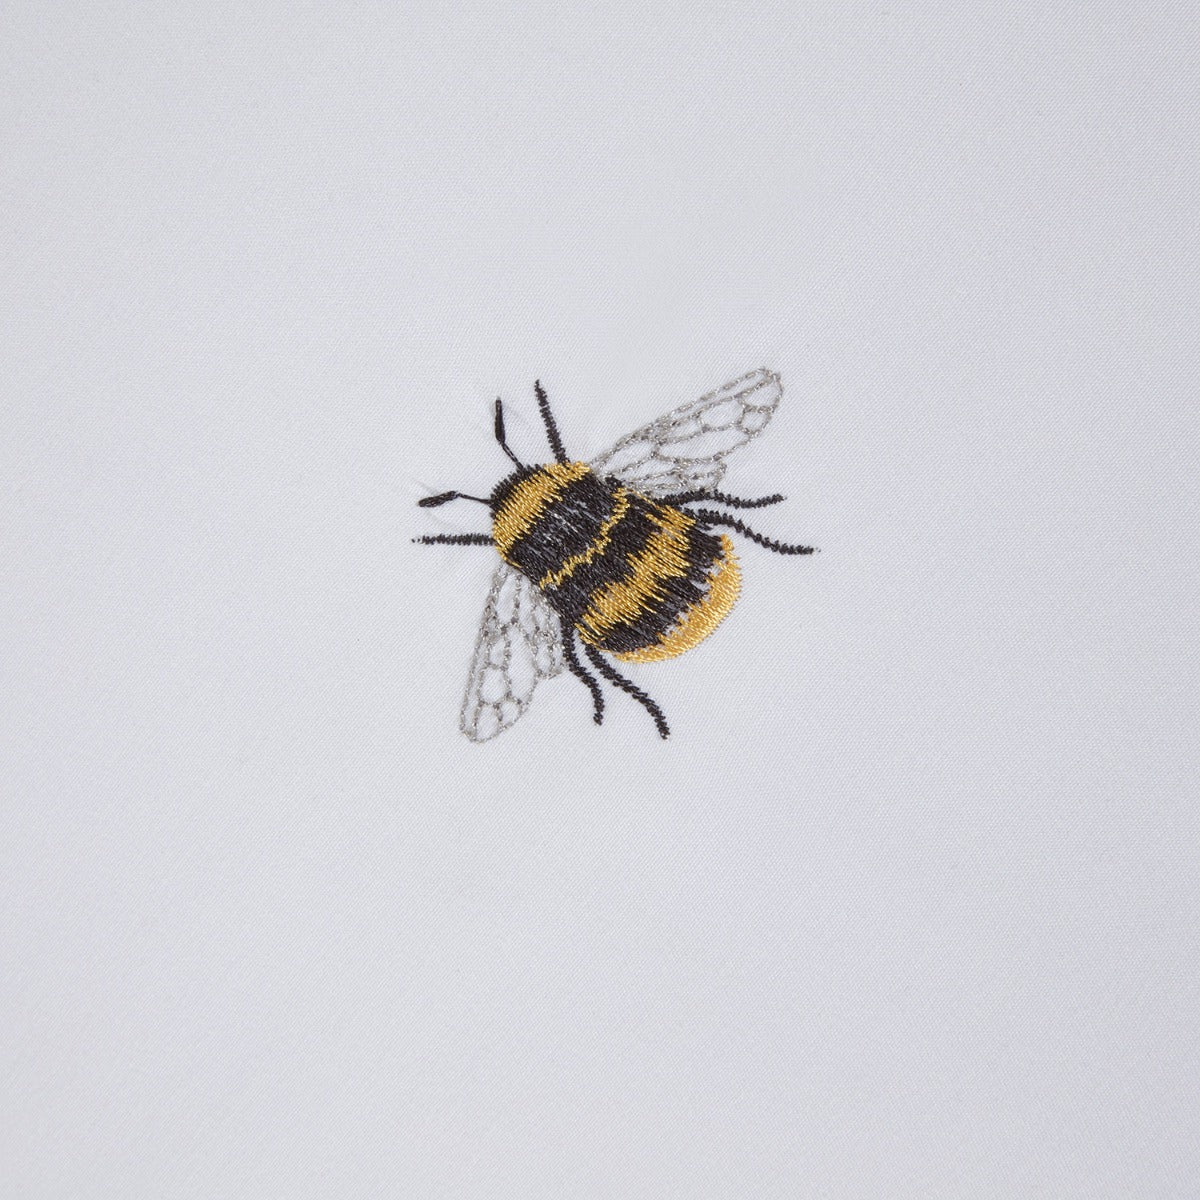 Bumblebee White Supersoft Embroidered Duvet Set